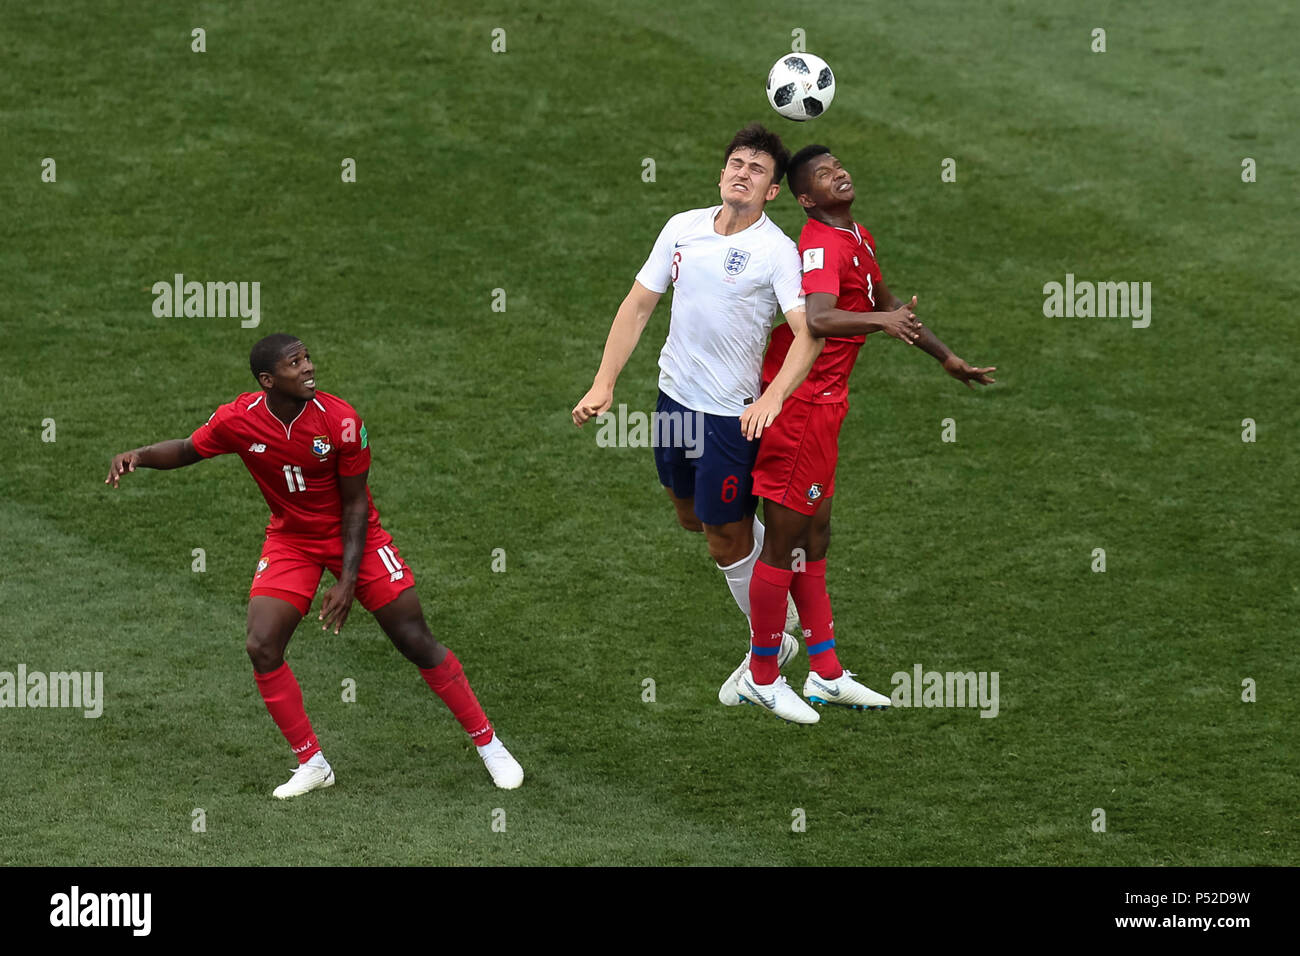 Nizhny Novgorod, Russia. 24th June, 2018. Harry Maguire of England and Fidel Escobar of Panama compete for the ball during the 2018 FIFA World Cup Group G match between England and Panama at Nizhny Novgorod Stadium on June 24th 2018 in Nizhny Novgorod, Russia. (Photo by Daniel Chesterton/phcimages.com) Credit: PHC Images/Alamy Live News Stock Photo